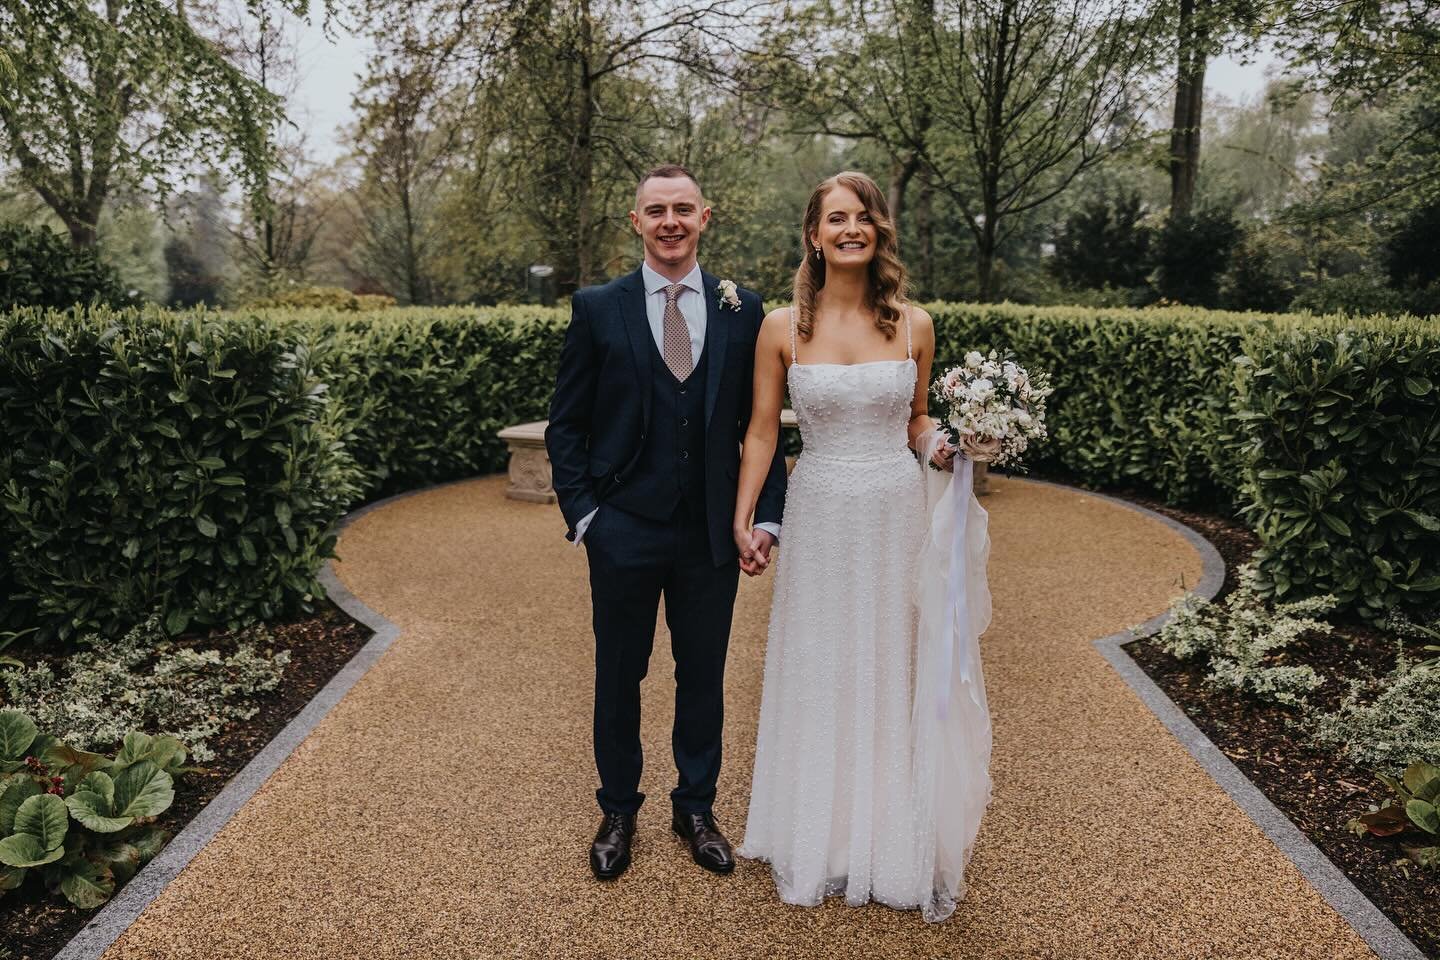 Ian &amp; Helen // @clandeboyelodgehotel 

A small private wedding in March saw weddings kick off in 2024 but yesterday really felt like the beginning of this year&rsquo;s wedding season. 

Yesterday, the weather didn&rsquo;t play ball but Ian &amp; 